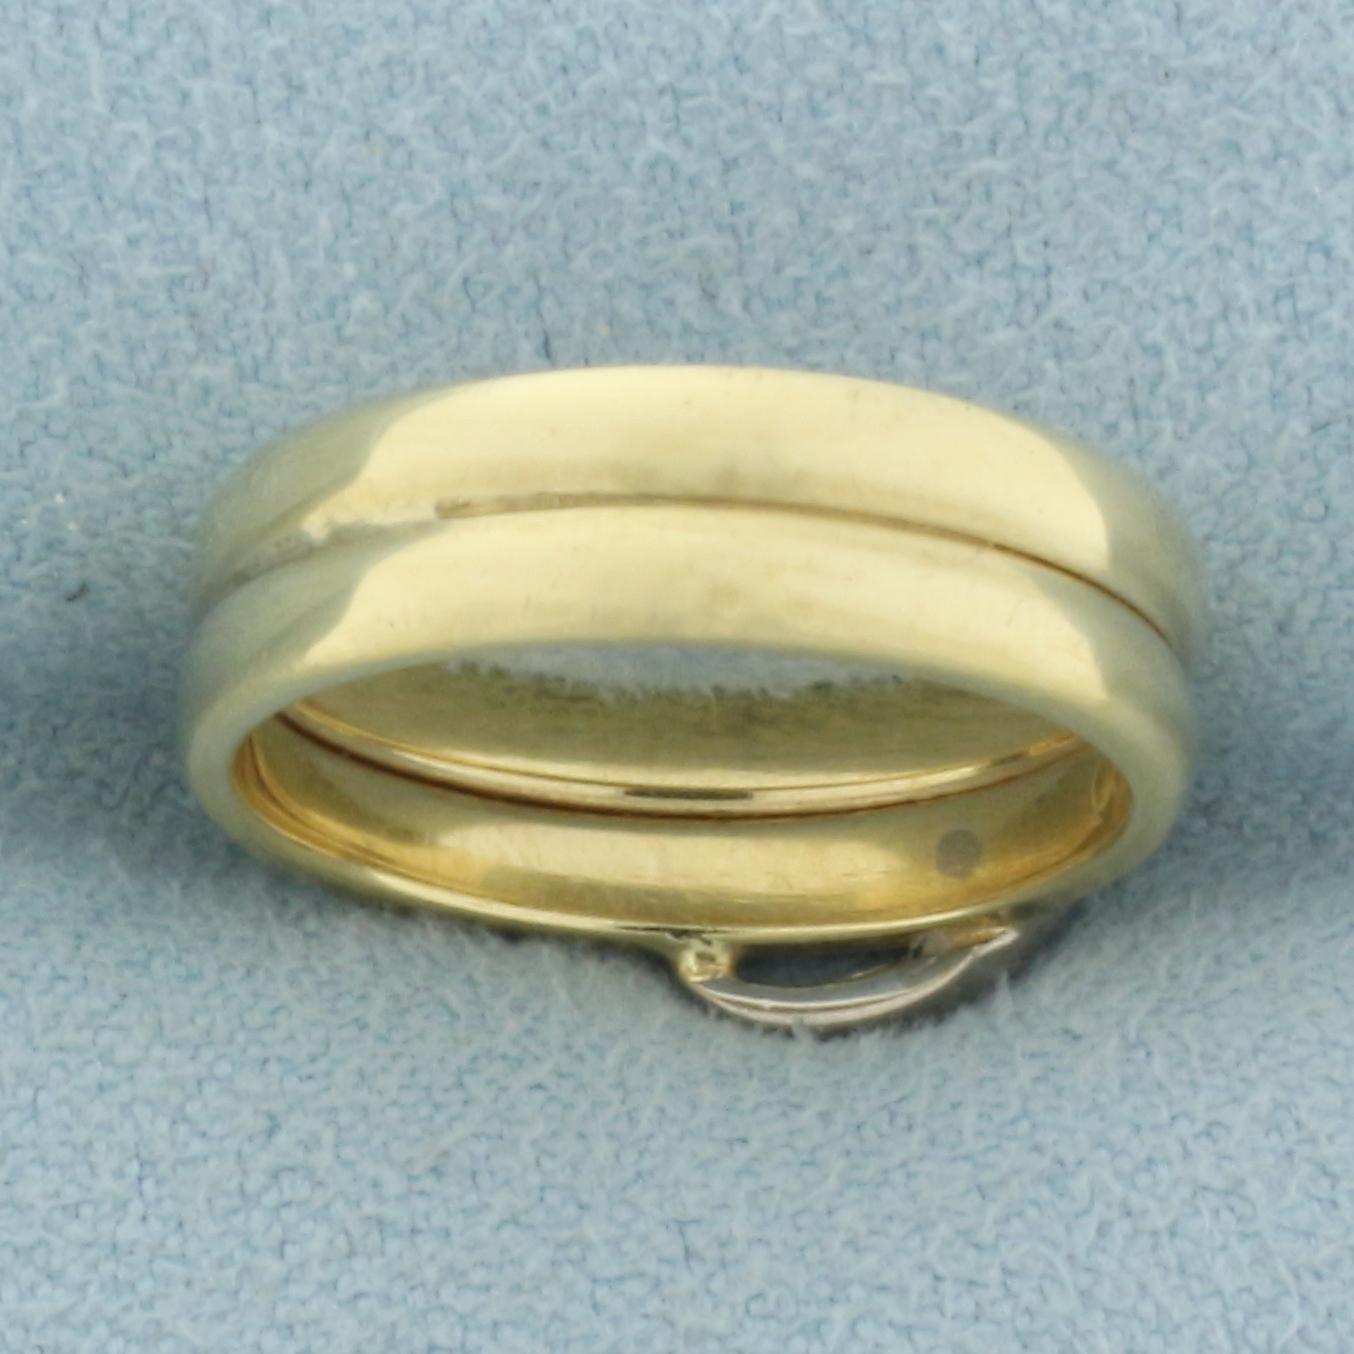 Unique Double Band Wave Design Ring In 14k Yellow And White Gold